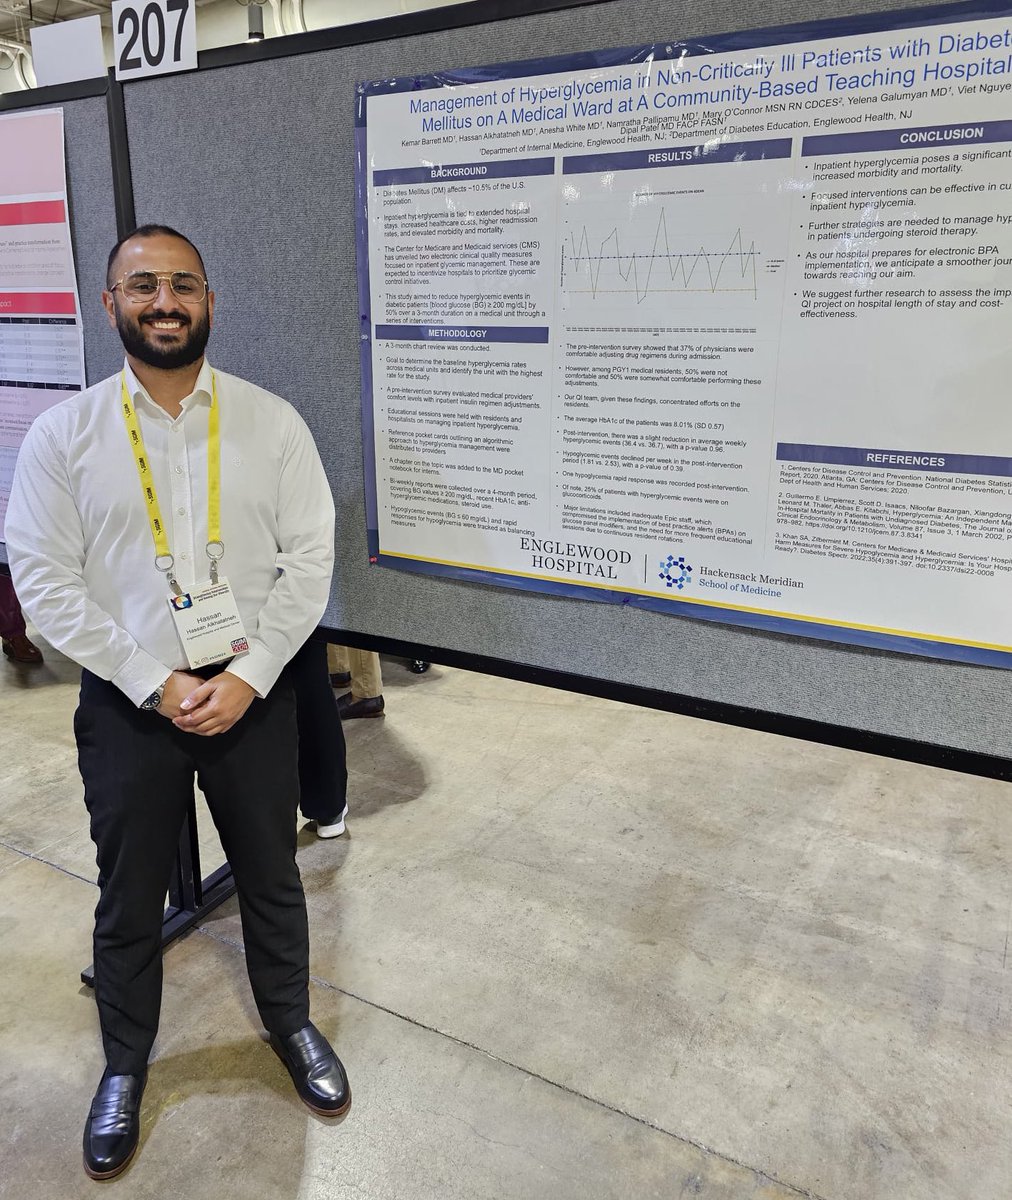 Hassan (PGY3 Chief) represented his quality improvement (QI) team at #SGIM24 on a project that aimed to improve glycemic control in non-critically ill patients with diabetes mellitus. #MedTwitter #MedEd #Research #IMRes #Diabetes #Hyperglycemia #QI #QualityImprovement